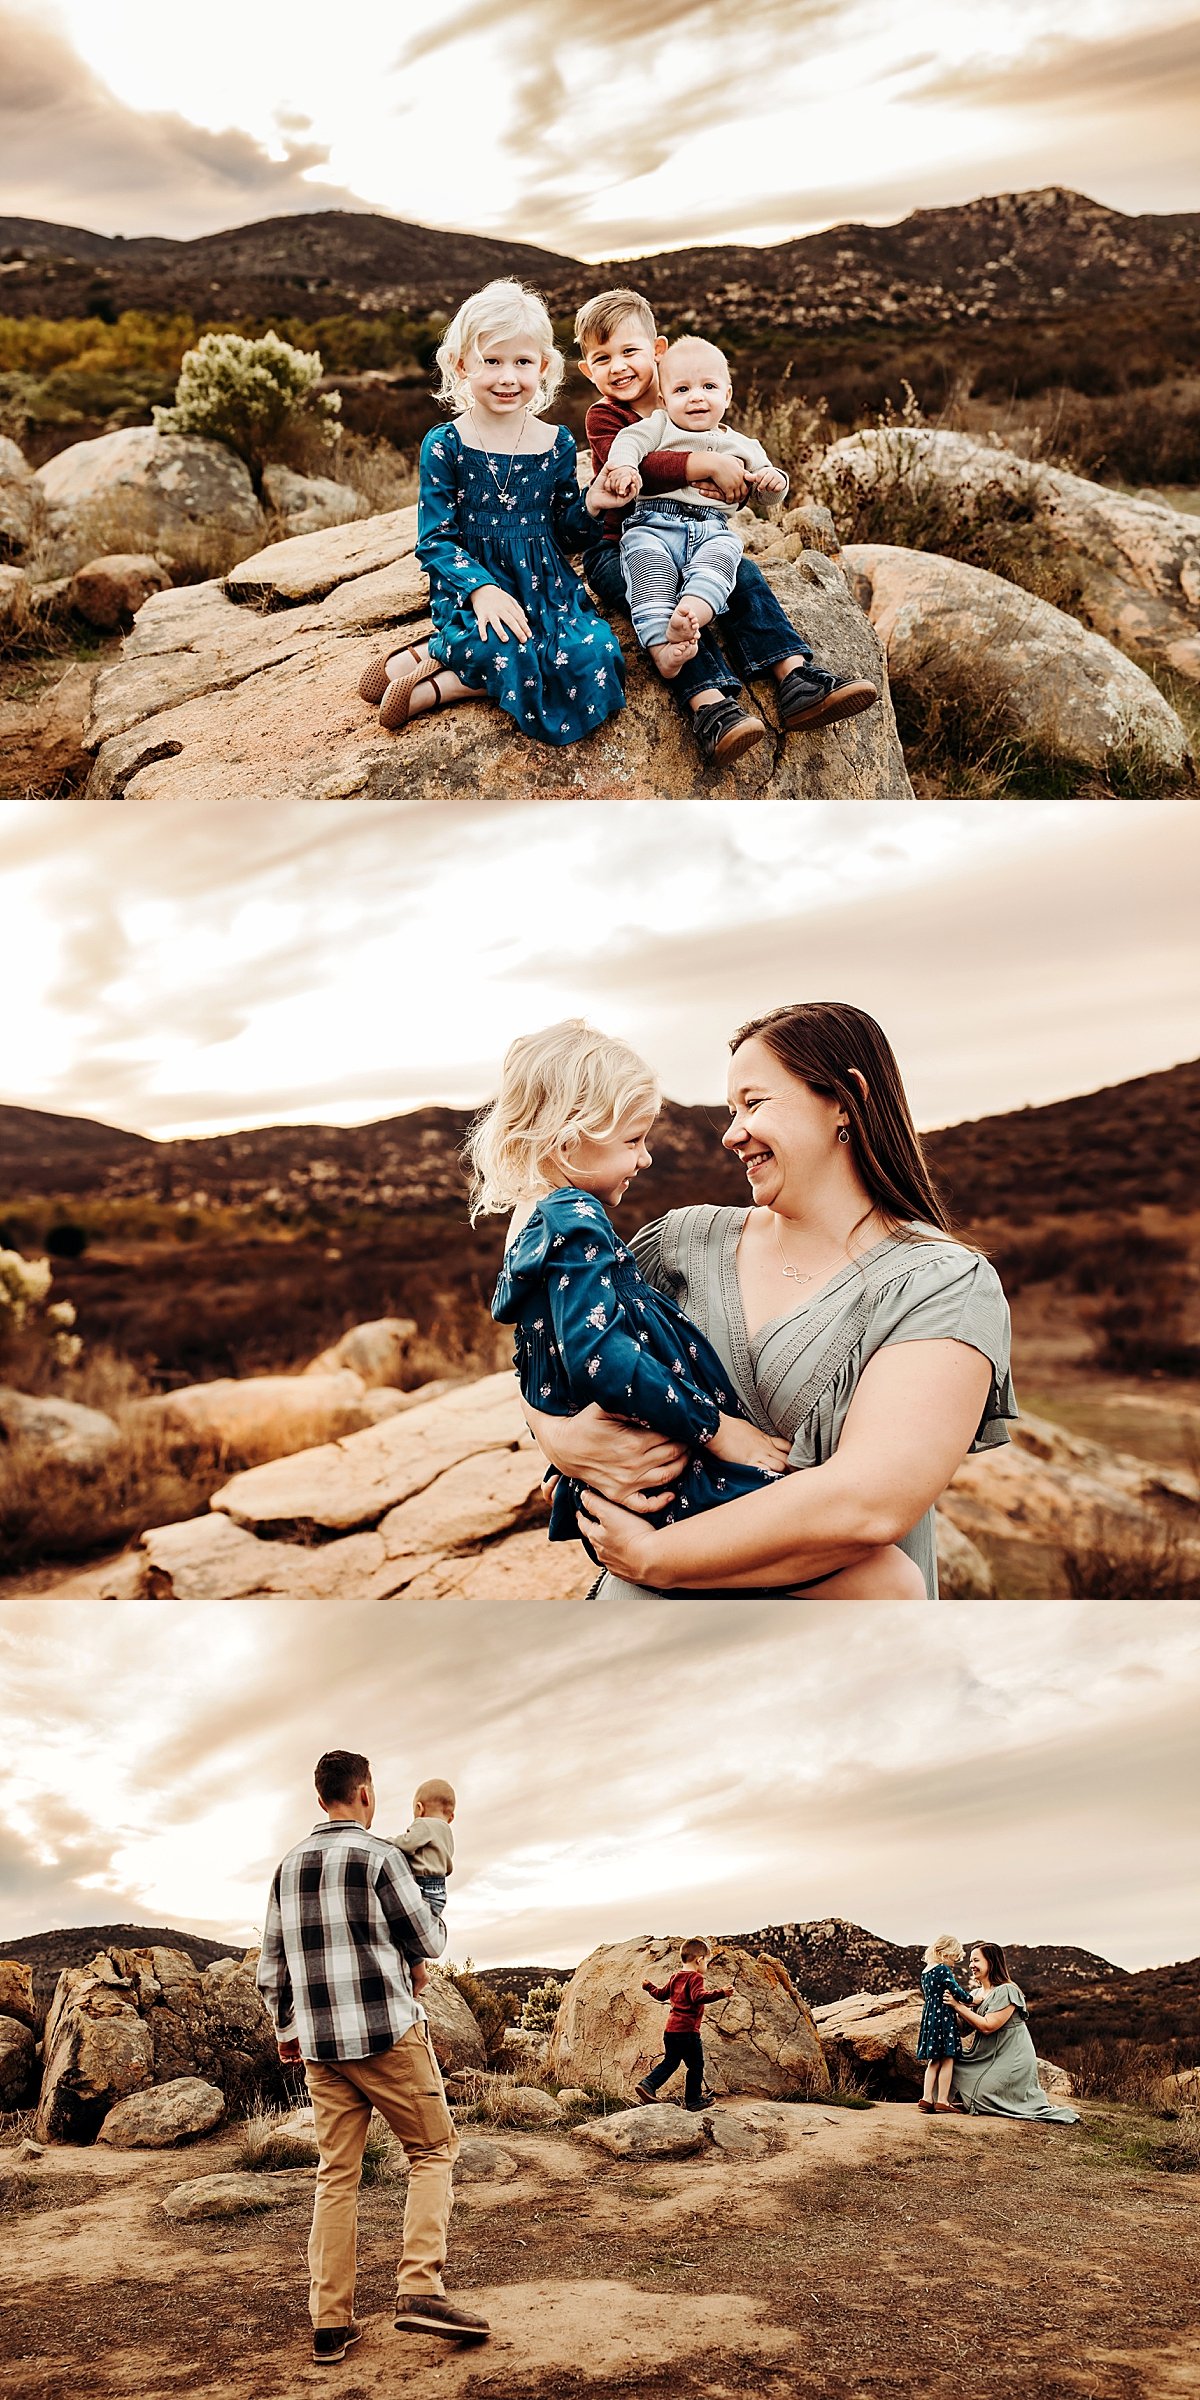  three kids sitting together on rocks in Colorado by Christa paustenbaugh photography 